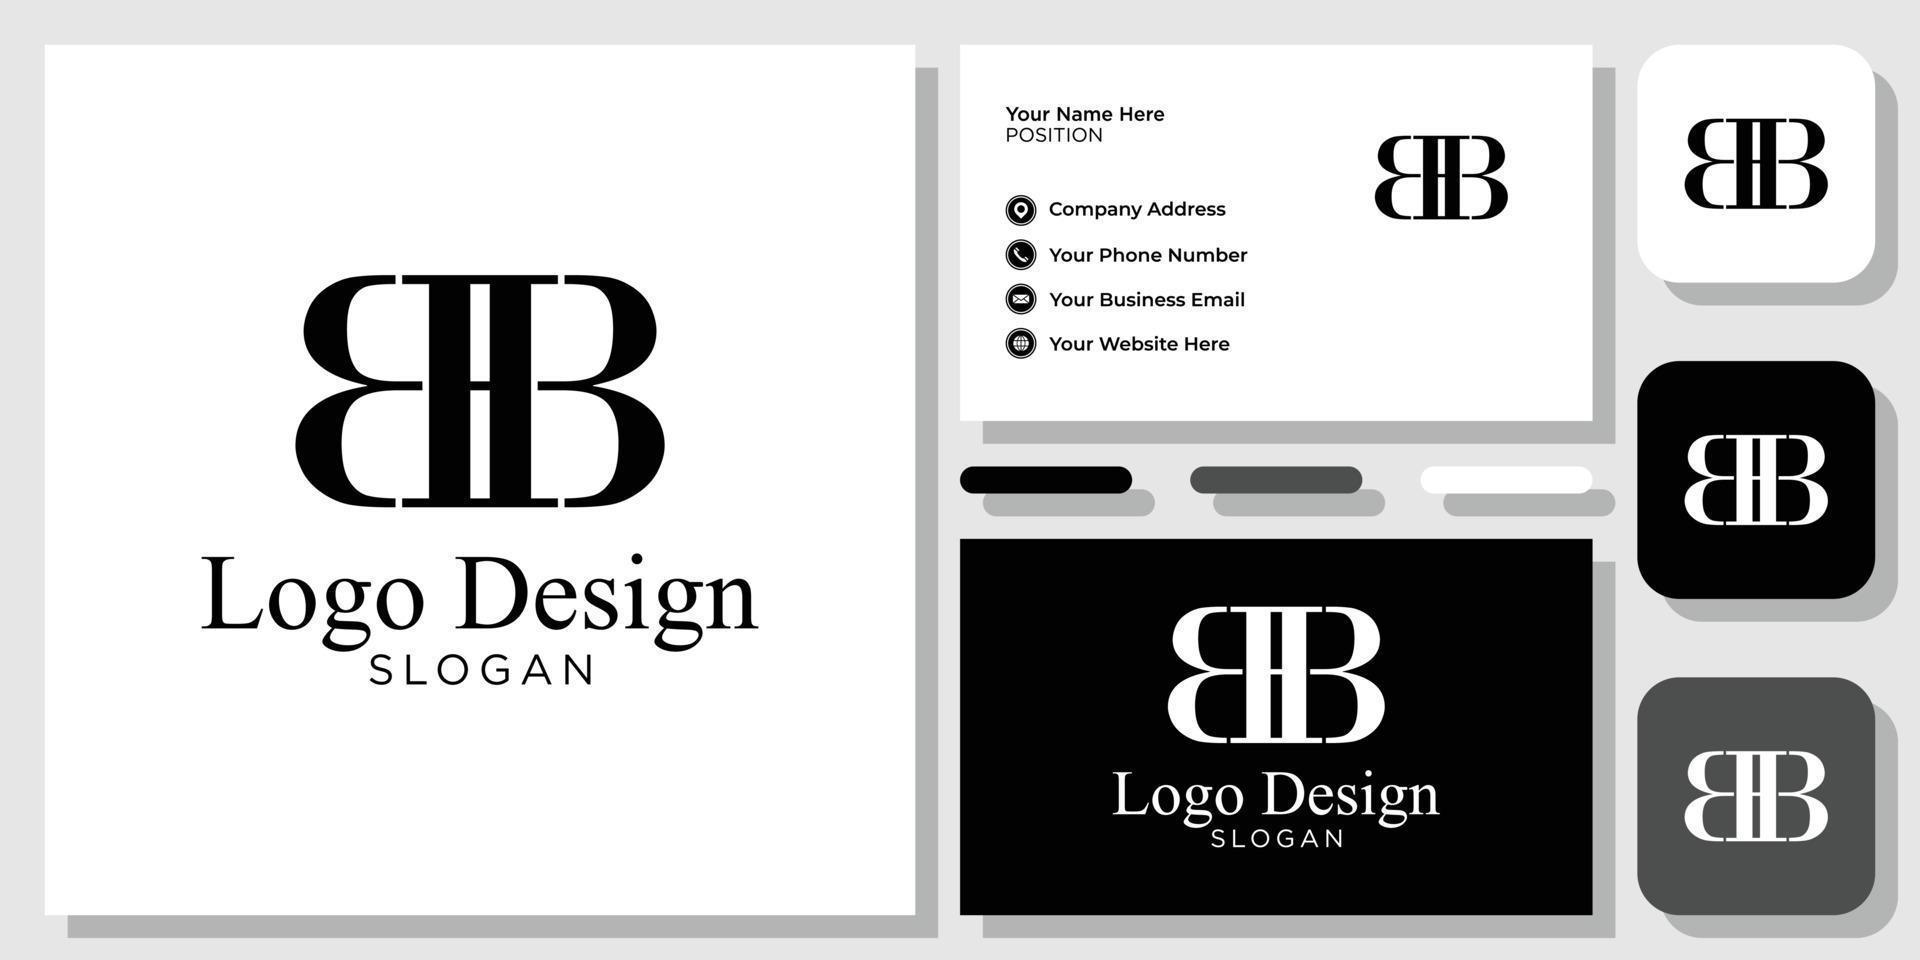 logo design initials letters combination vintage with business card template vector